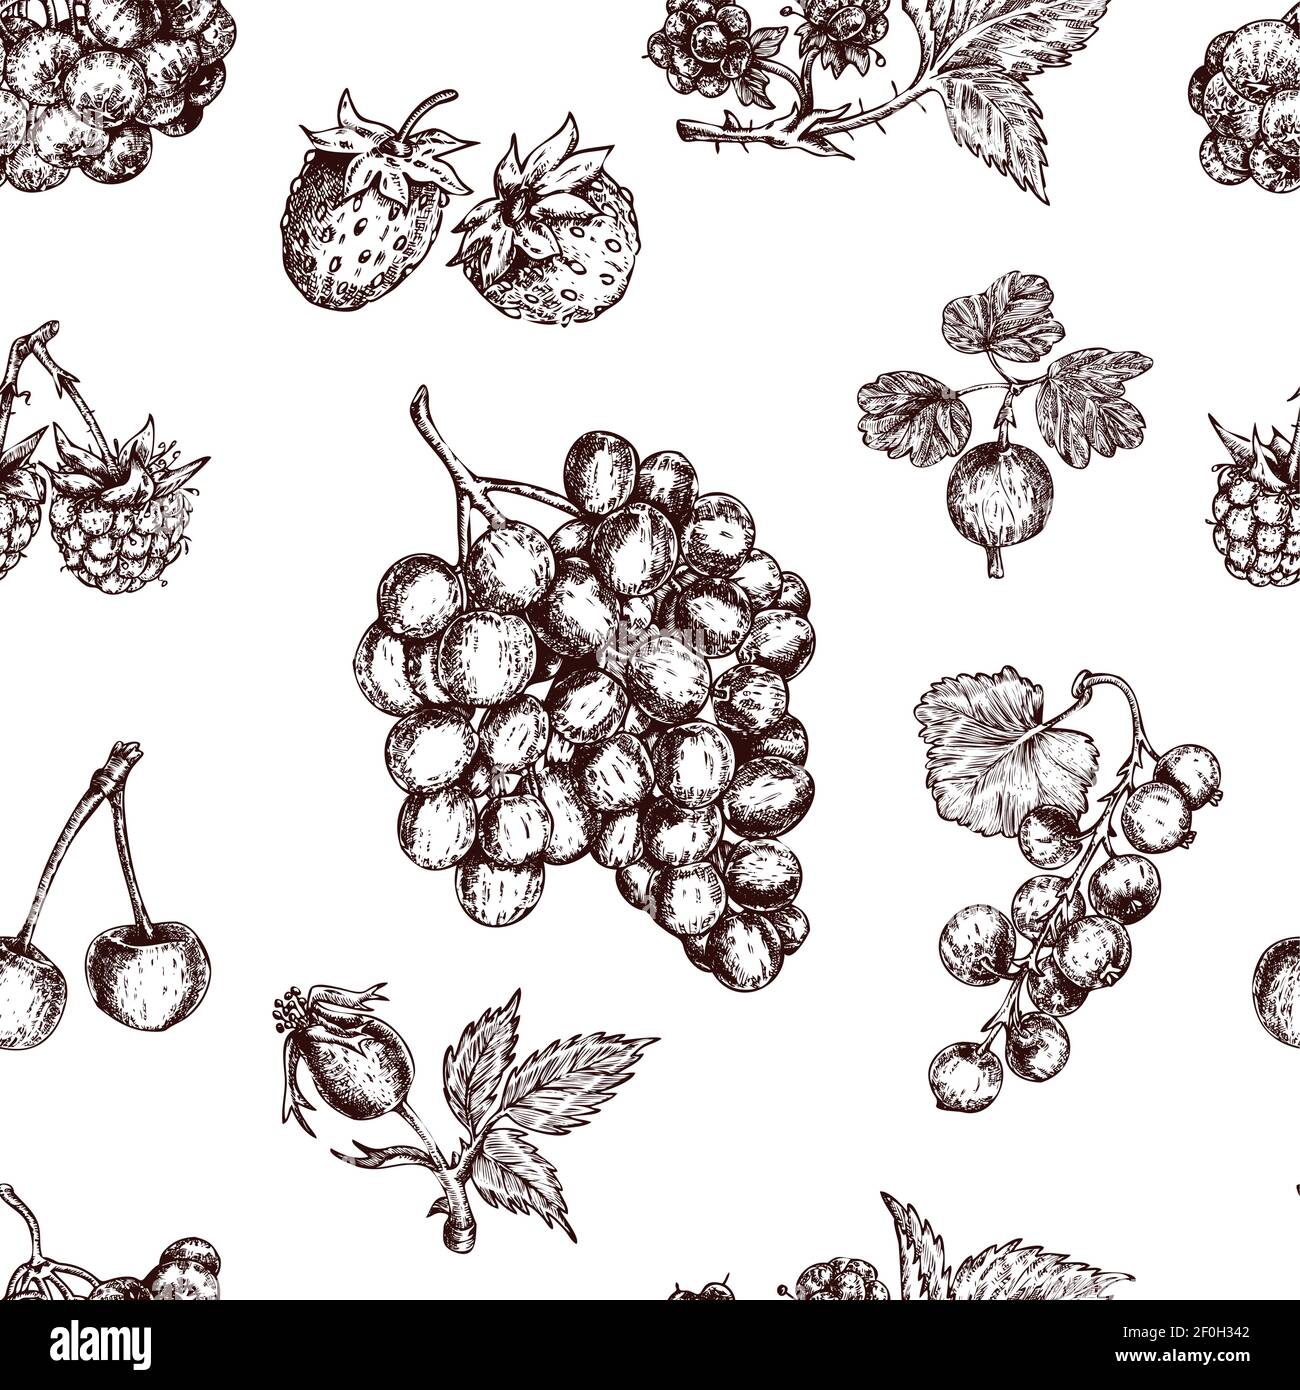 Berries hand drawn seamless pattern with black currant wild strawberry cherry and bunch of grapes vector illustration Stock Vector